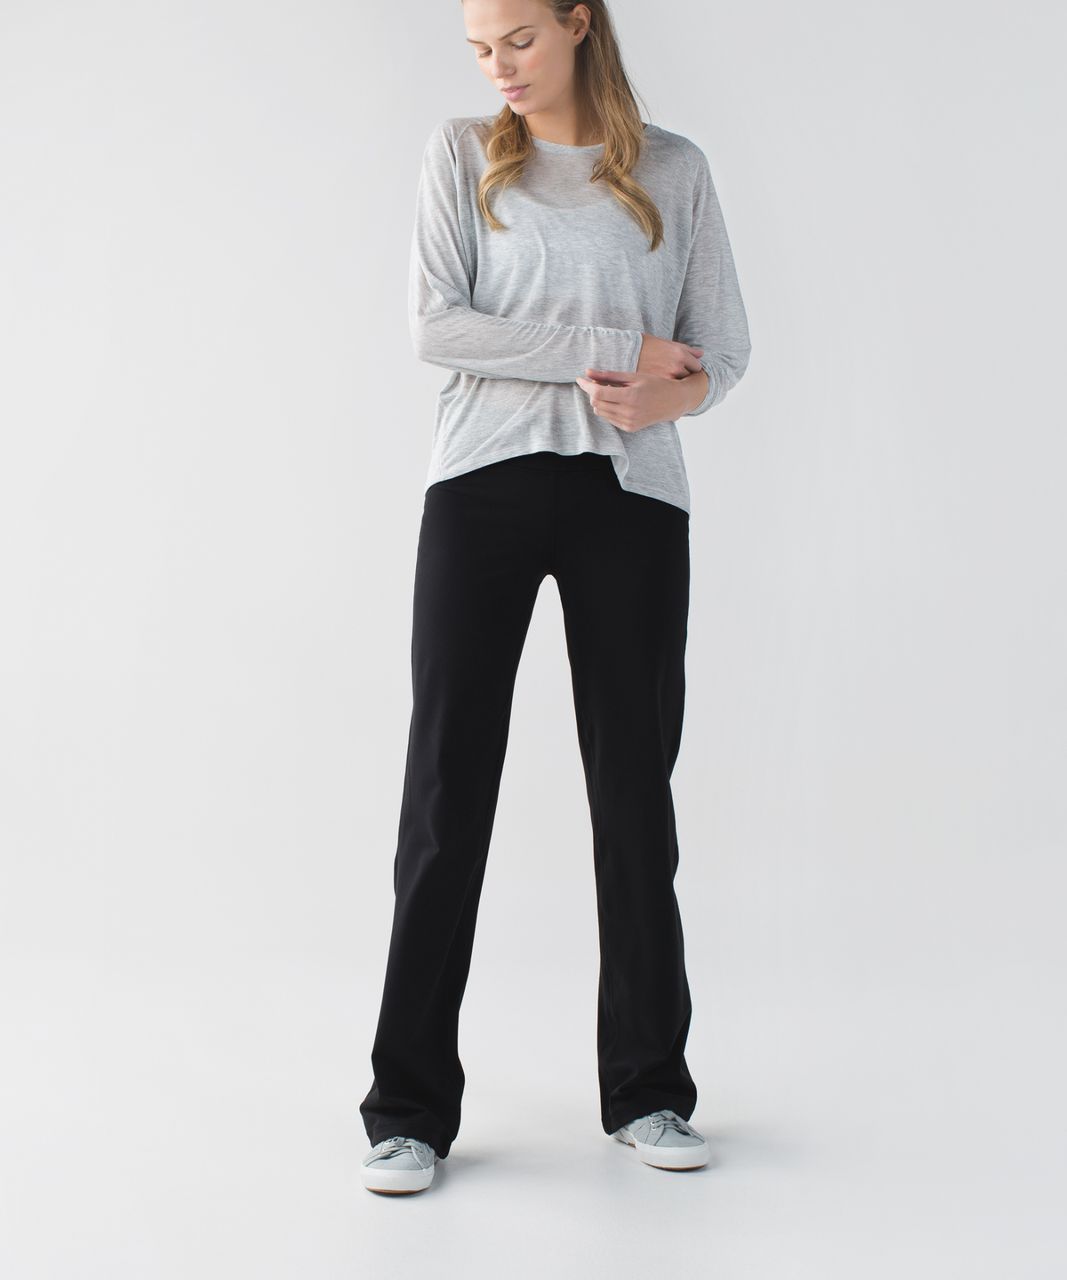 Lululemon Relaxed Fit Pant - Black